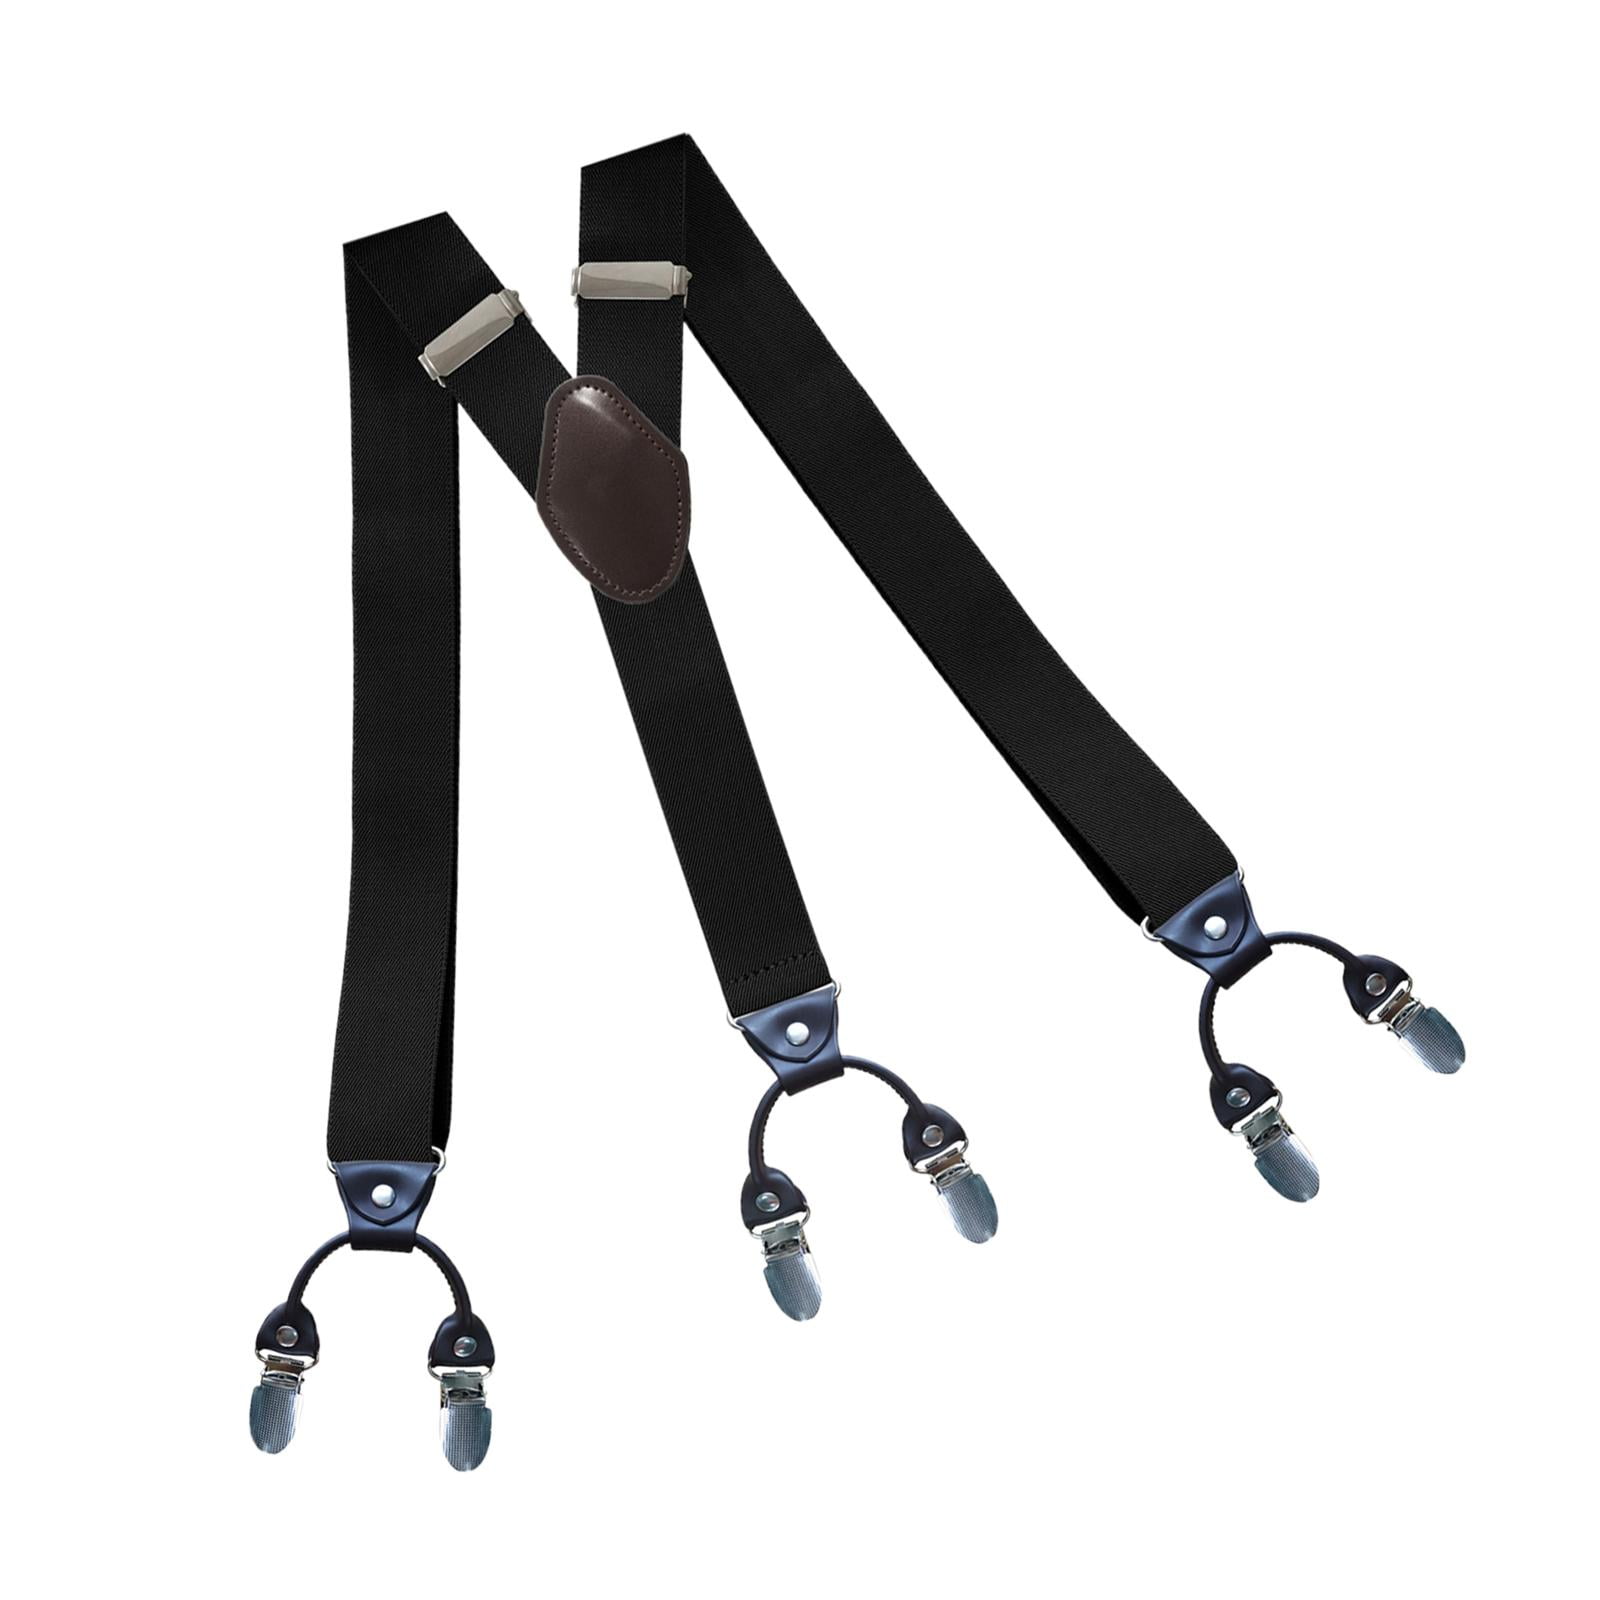  3 Pack Suspenders 1 Inch Adjustable Y Back Suspenders with  Heavy Duty Clips for Men Women Wedding Halloween Costume Accessory (Black)  : Clothing, Shoes & Jewelry